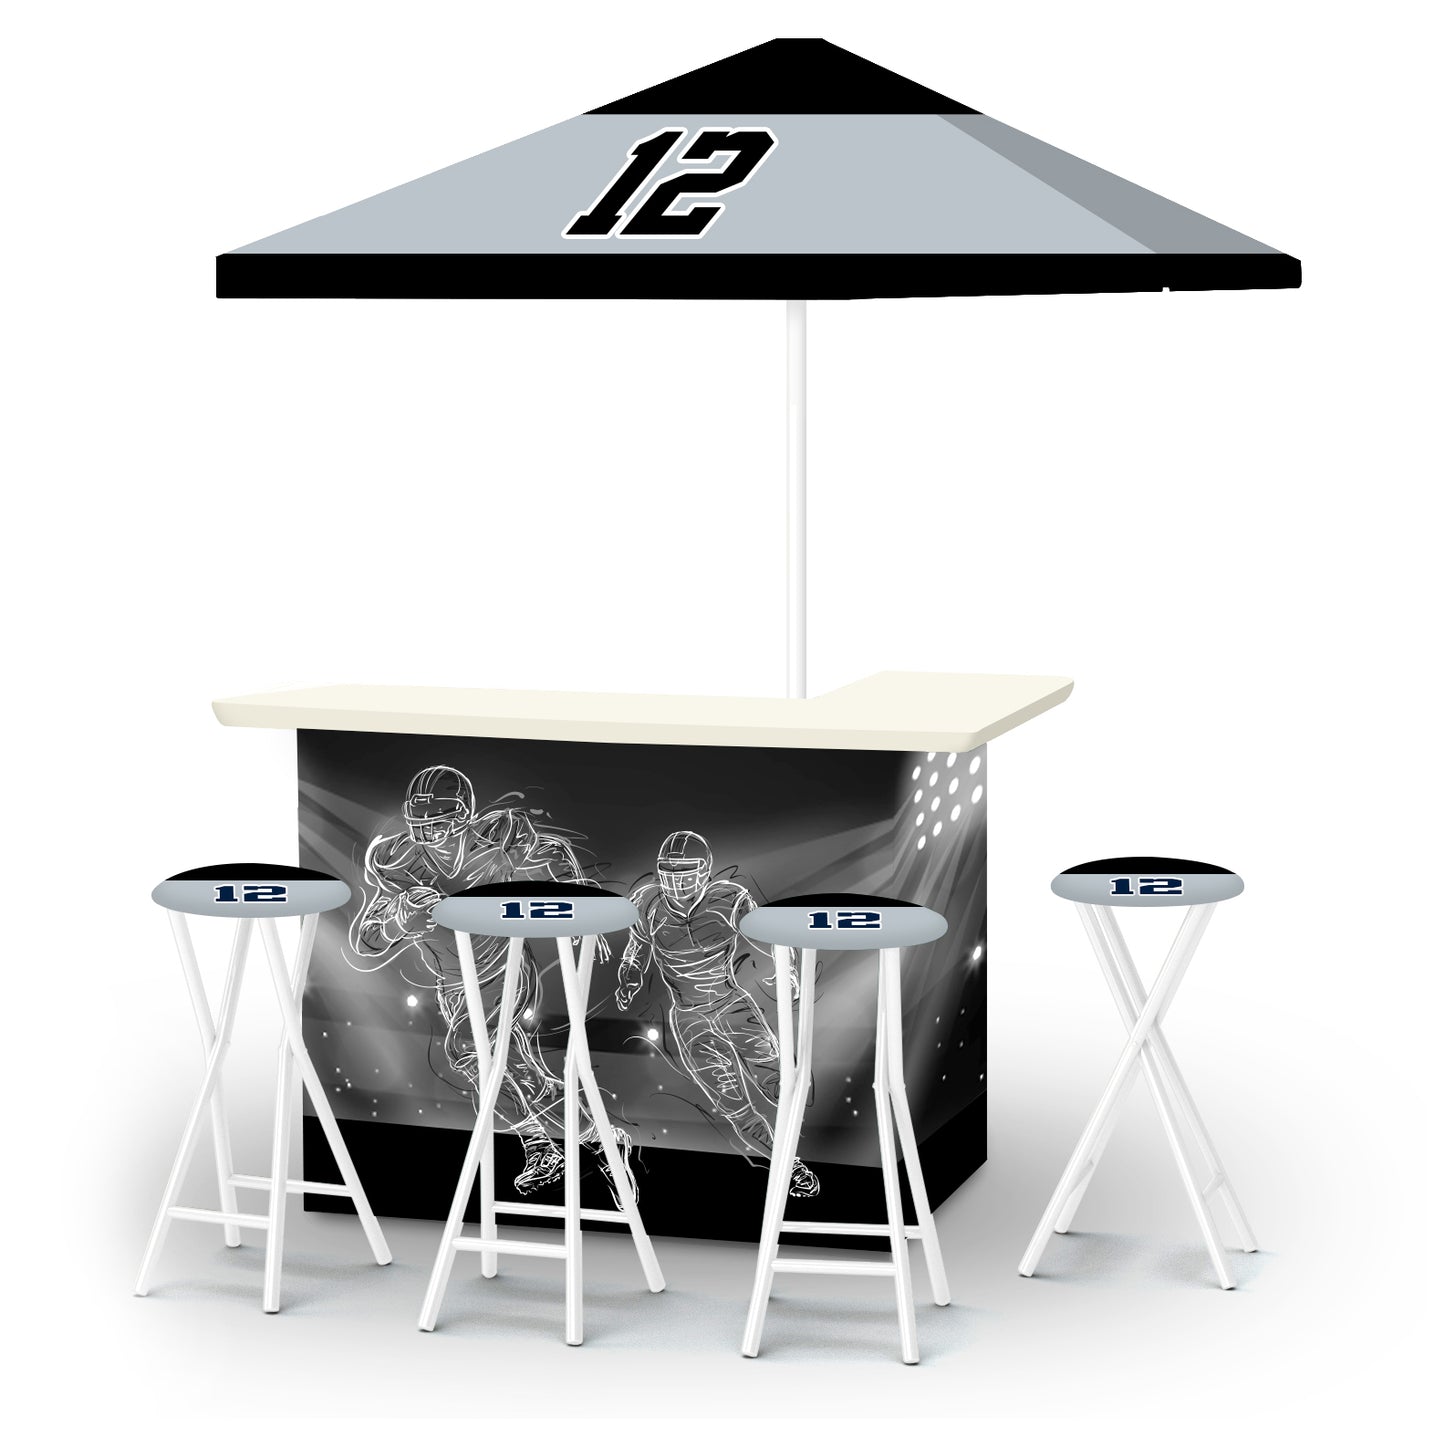 Rushing Yards Personalized Portable Pop-Up Bar